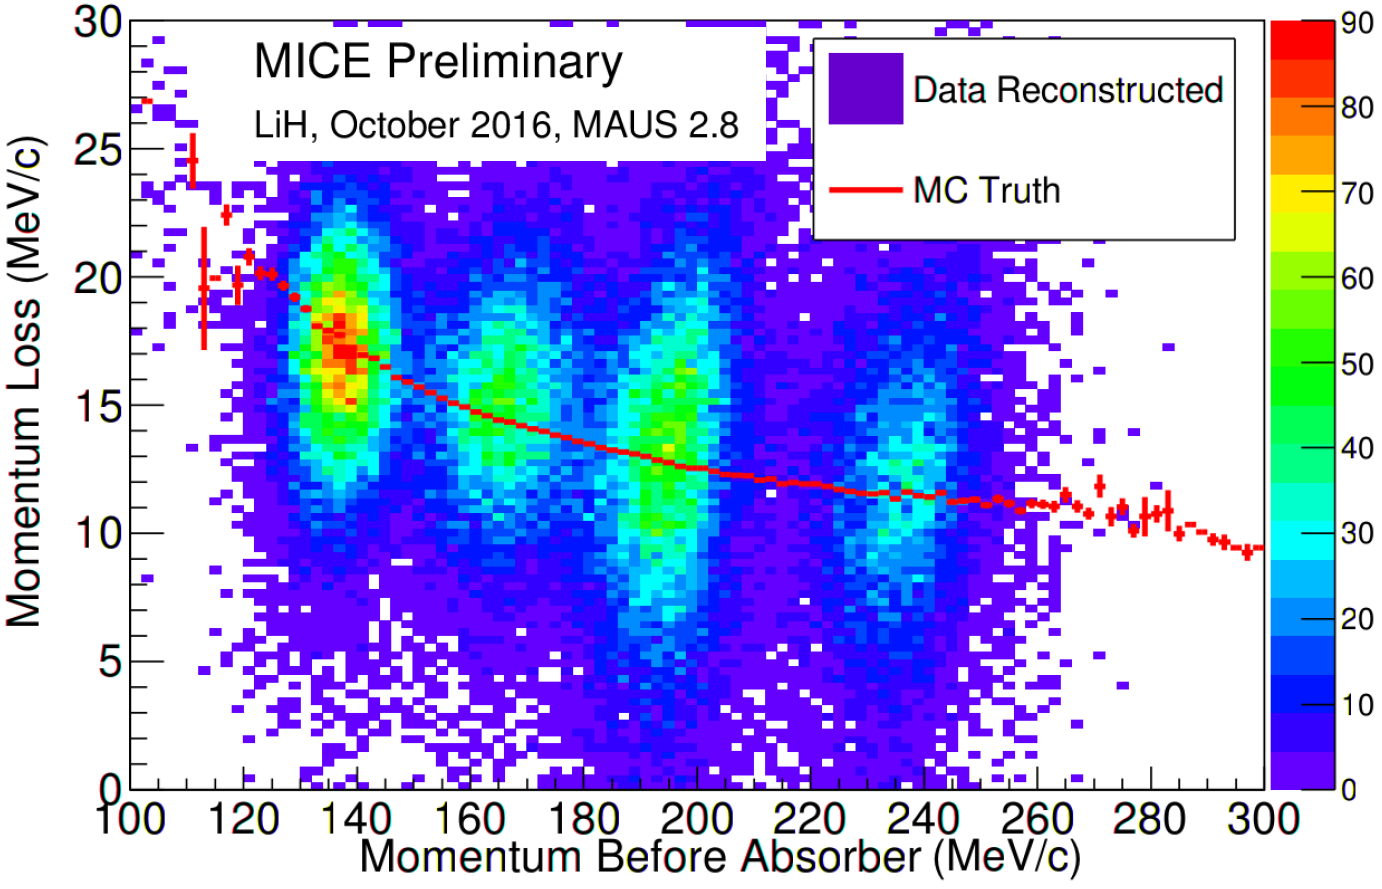 Intensity plot of muon momentum before absorber against momentum loss. Intense patches at nominal momenta of incoming muon beams